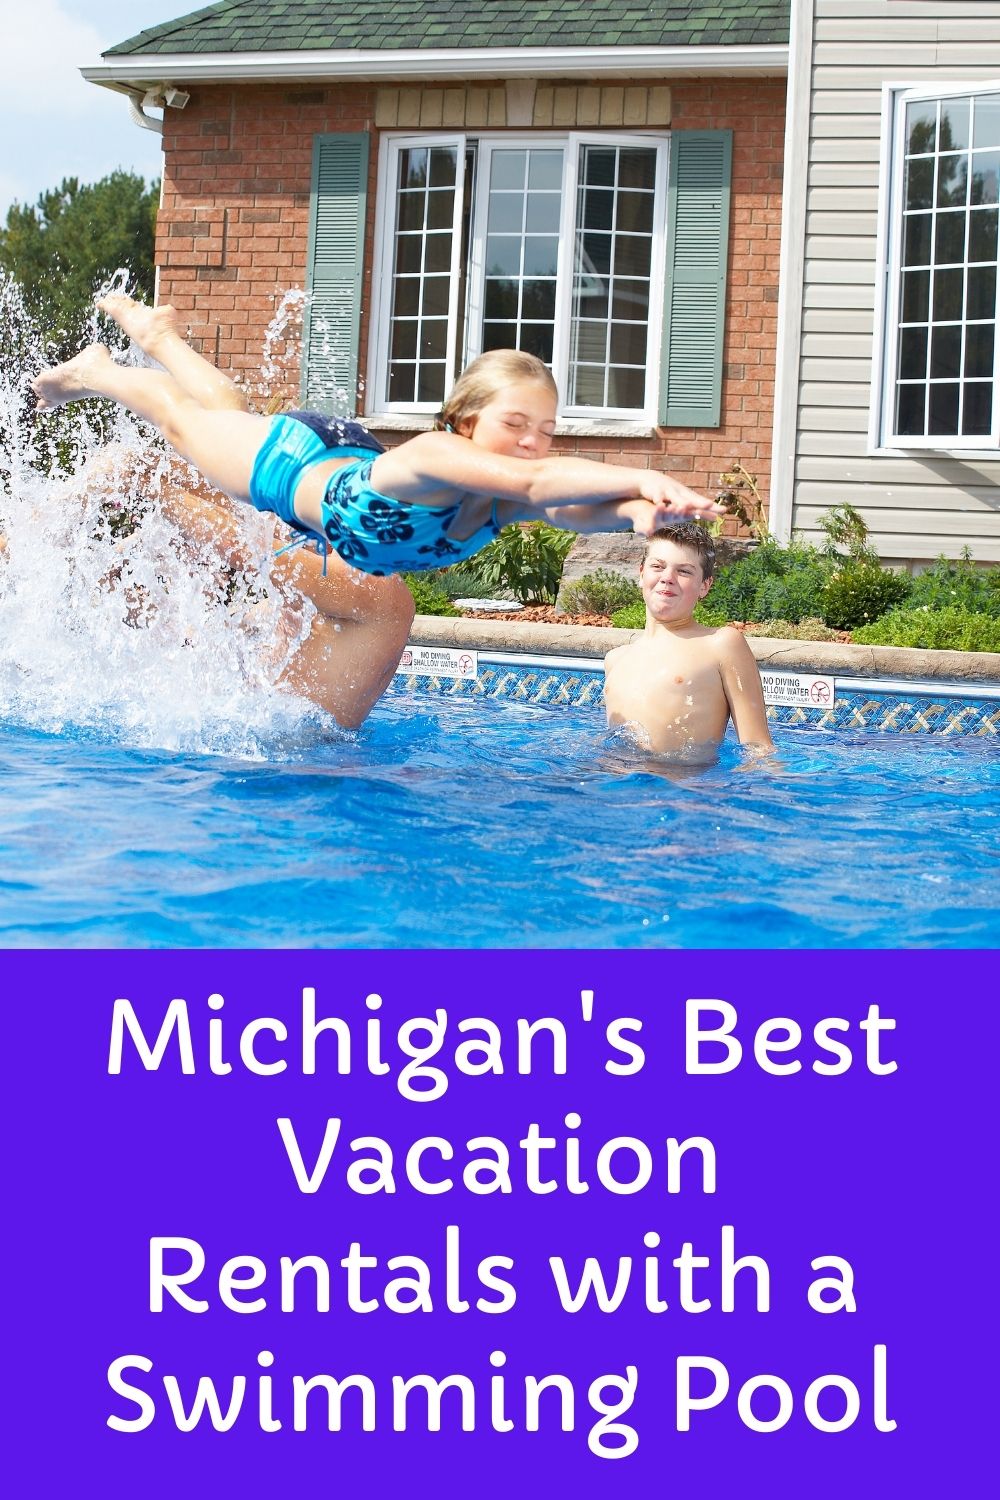 Michigans Best Vacation Rentals with a Swimming Pool